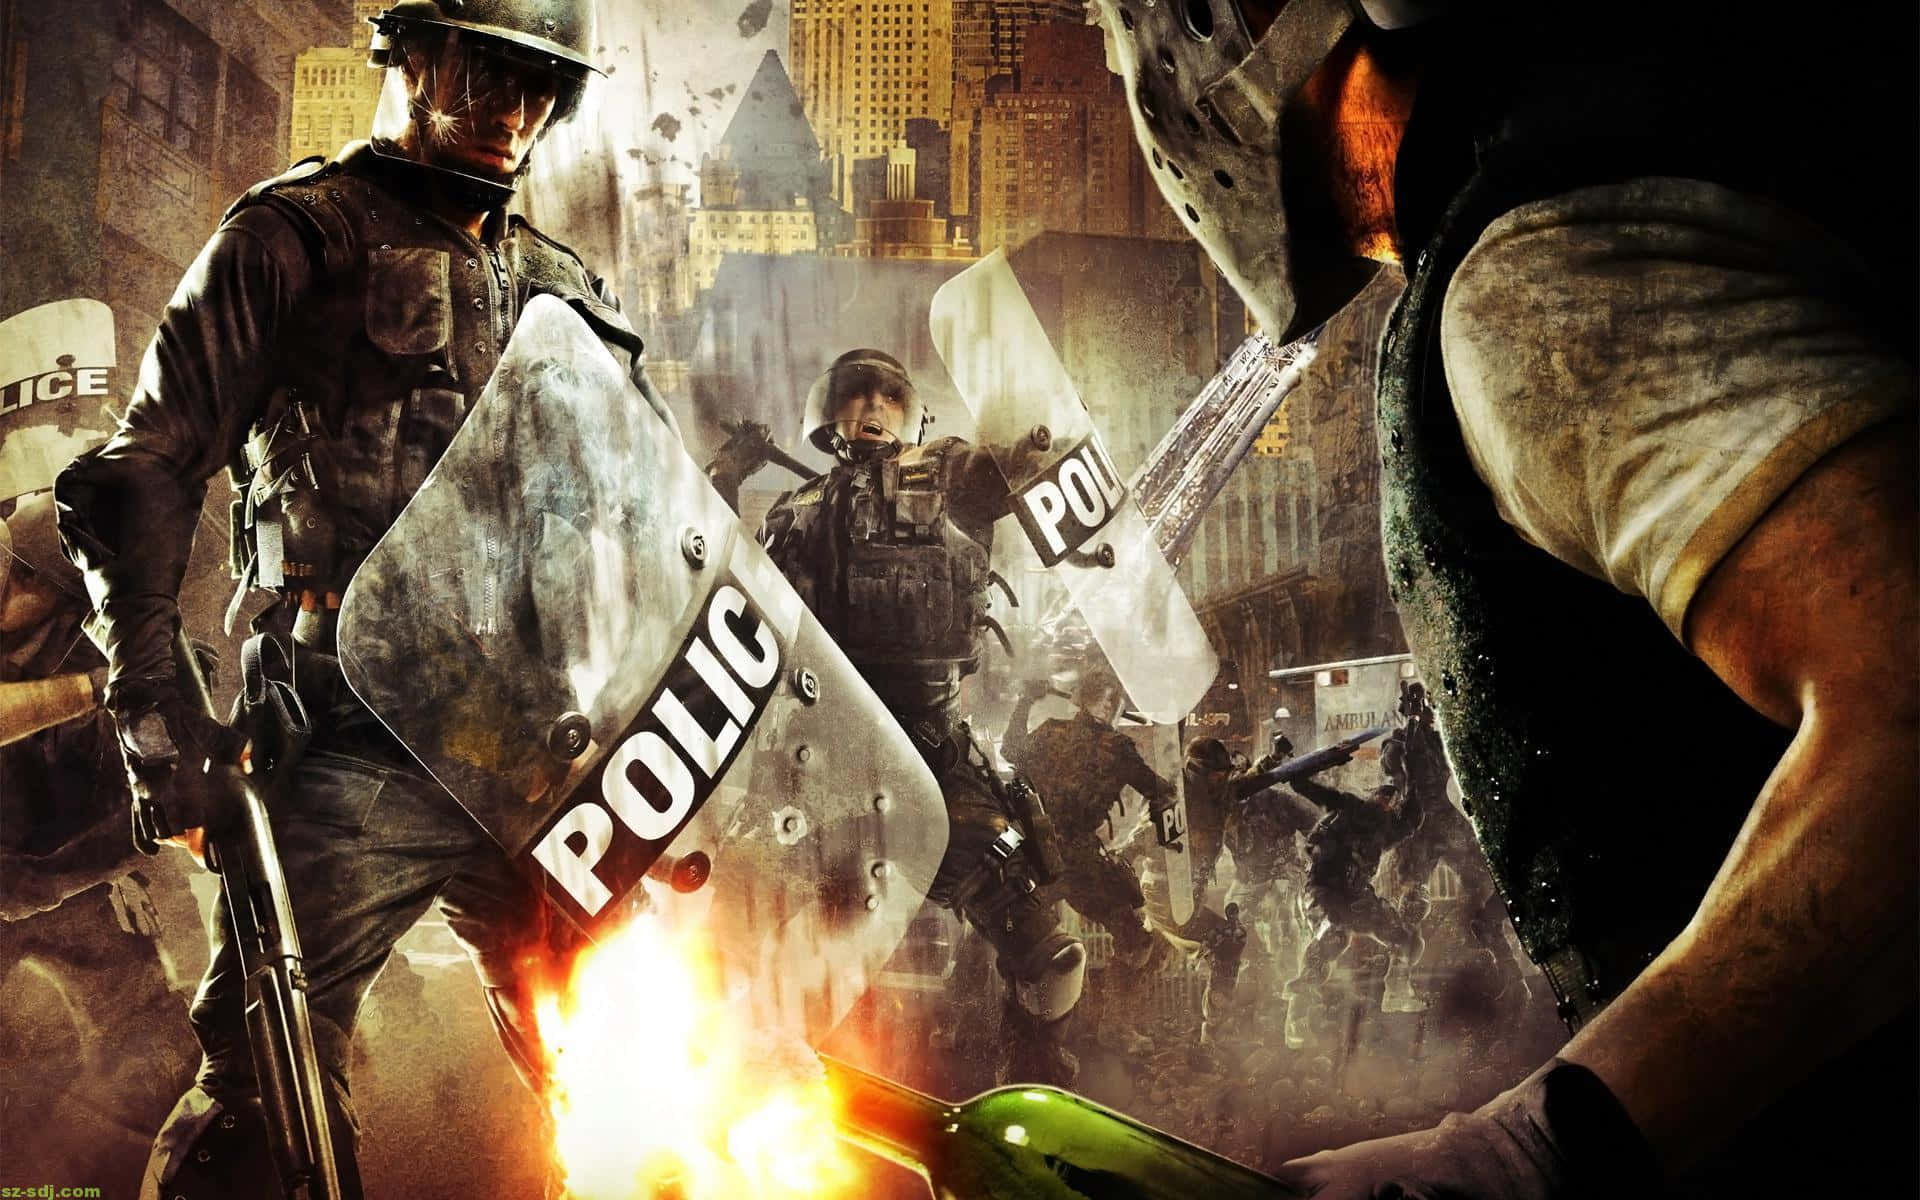 Cop With Shields In Urban Chaos Background